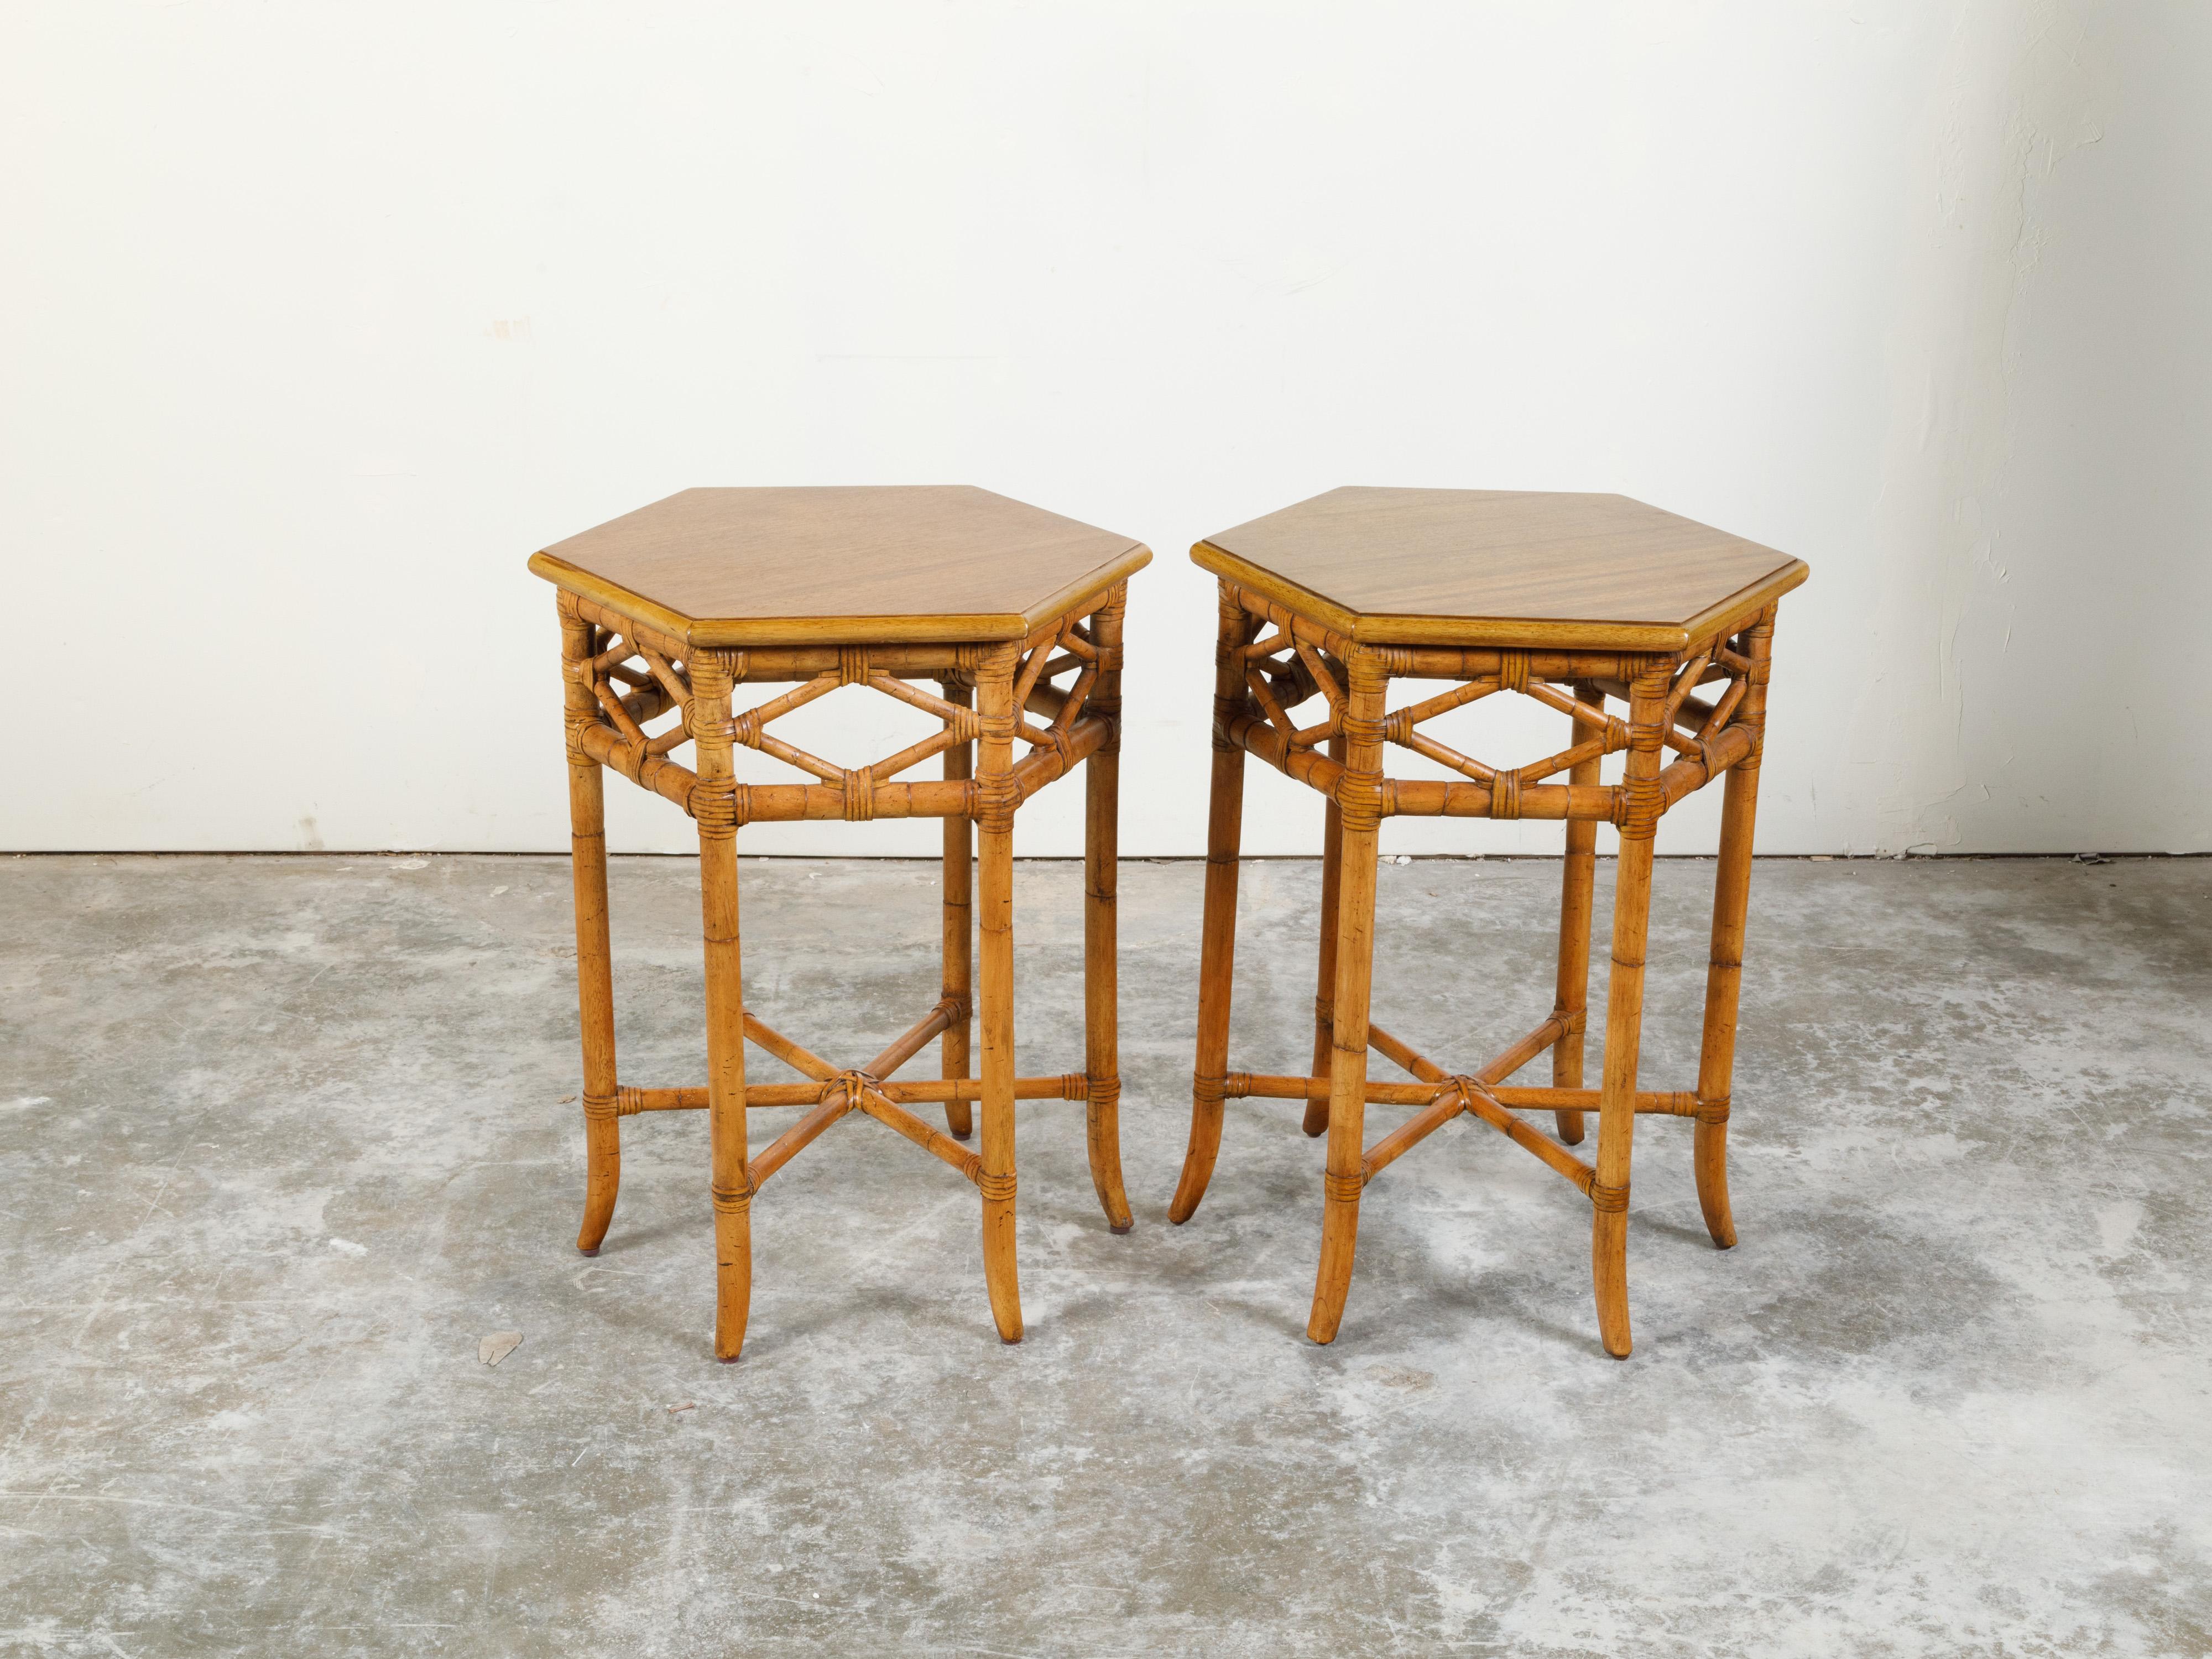 Pair of English Chinoiserie Style Faux Bamboo Side Tables with Hexagonal Tops 2